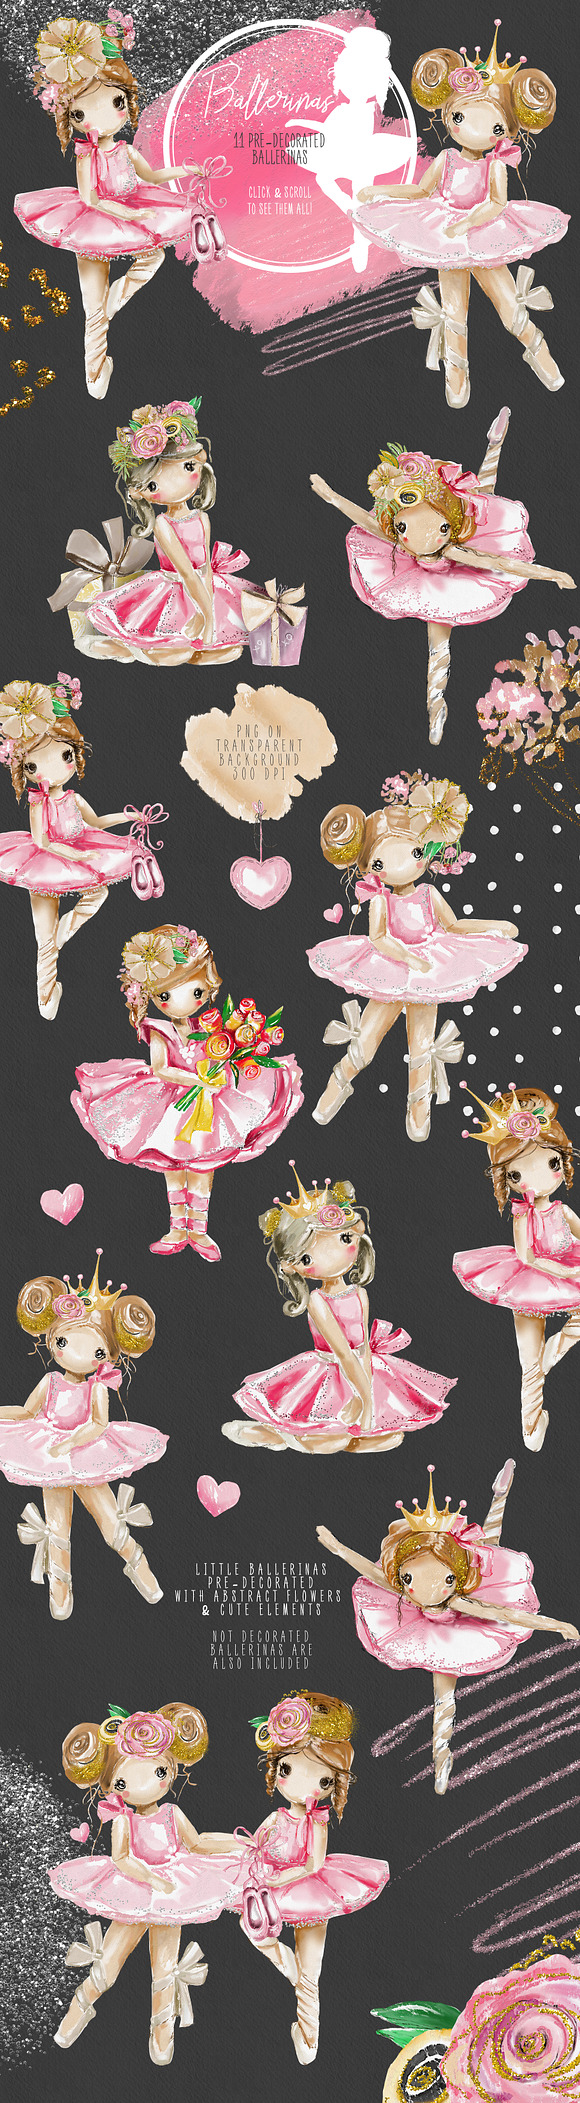 My Little Ballerina in Illustrations - product preview 1